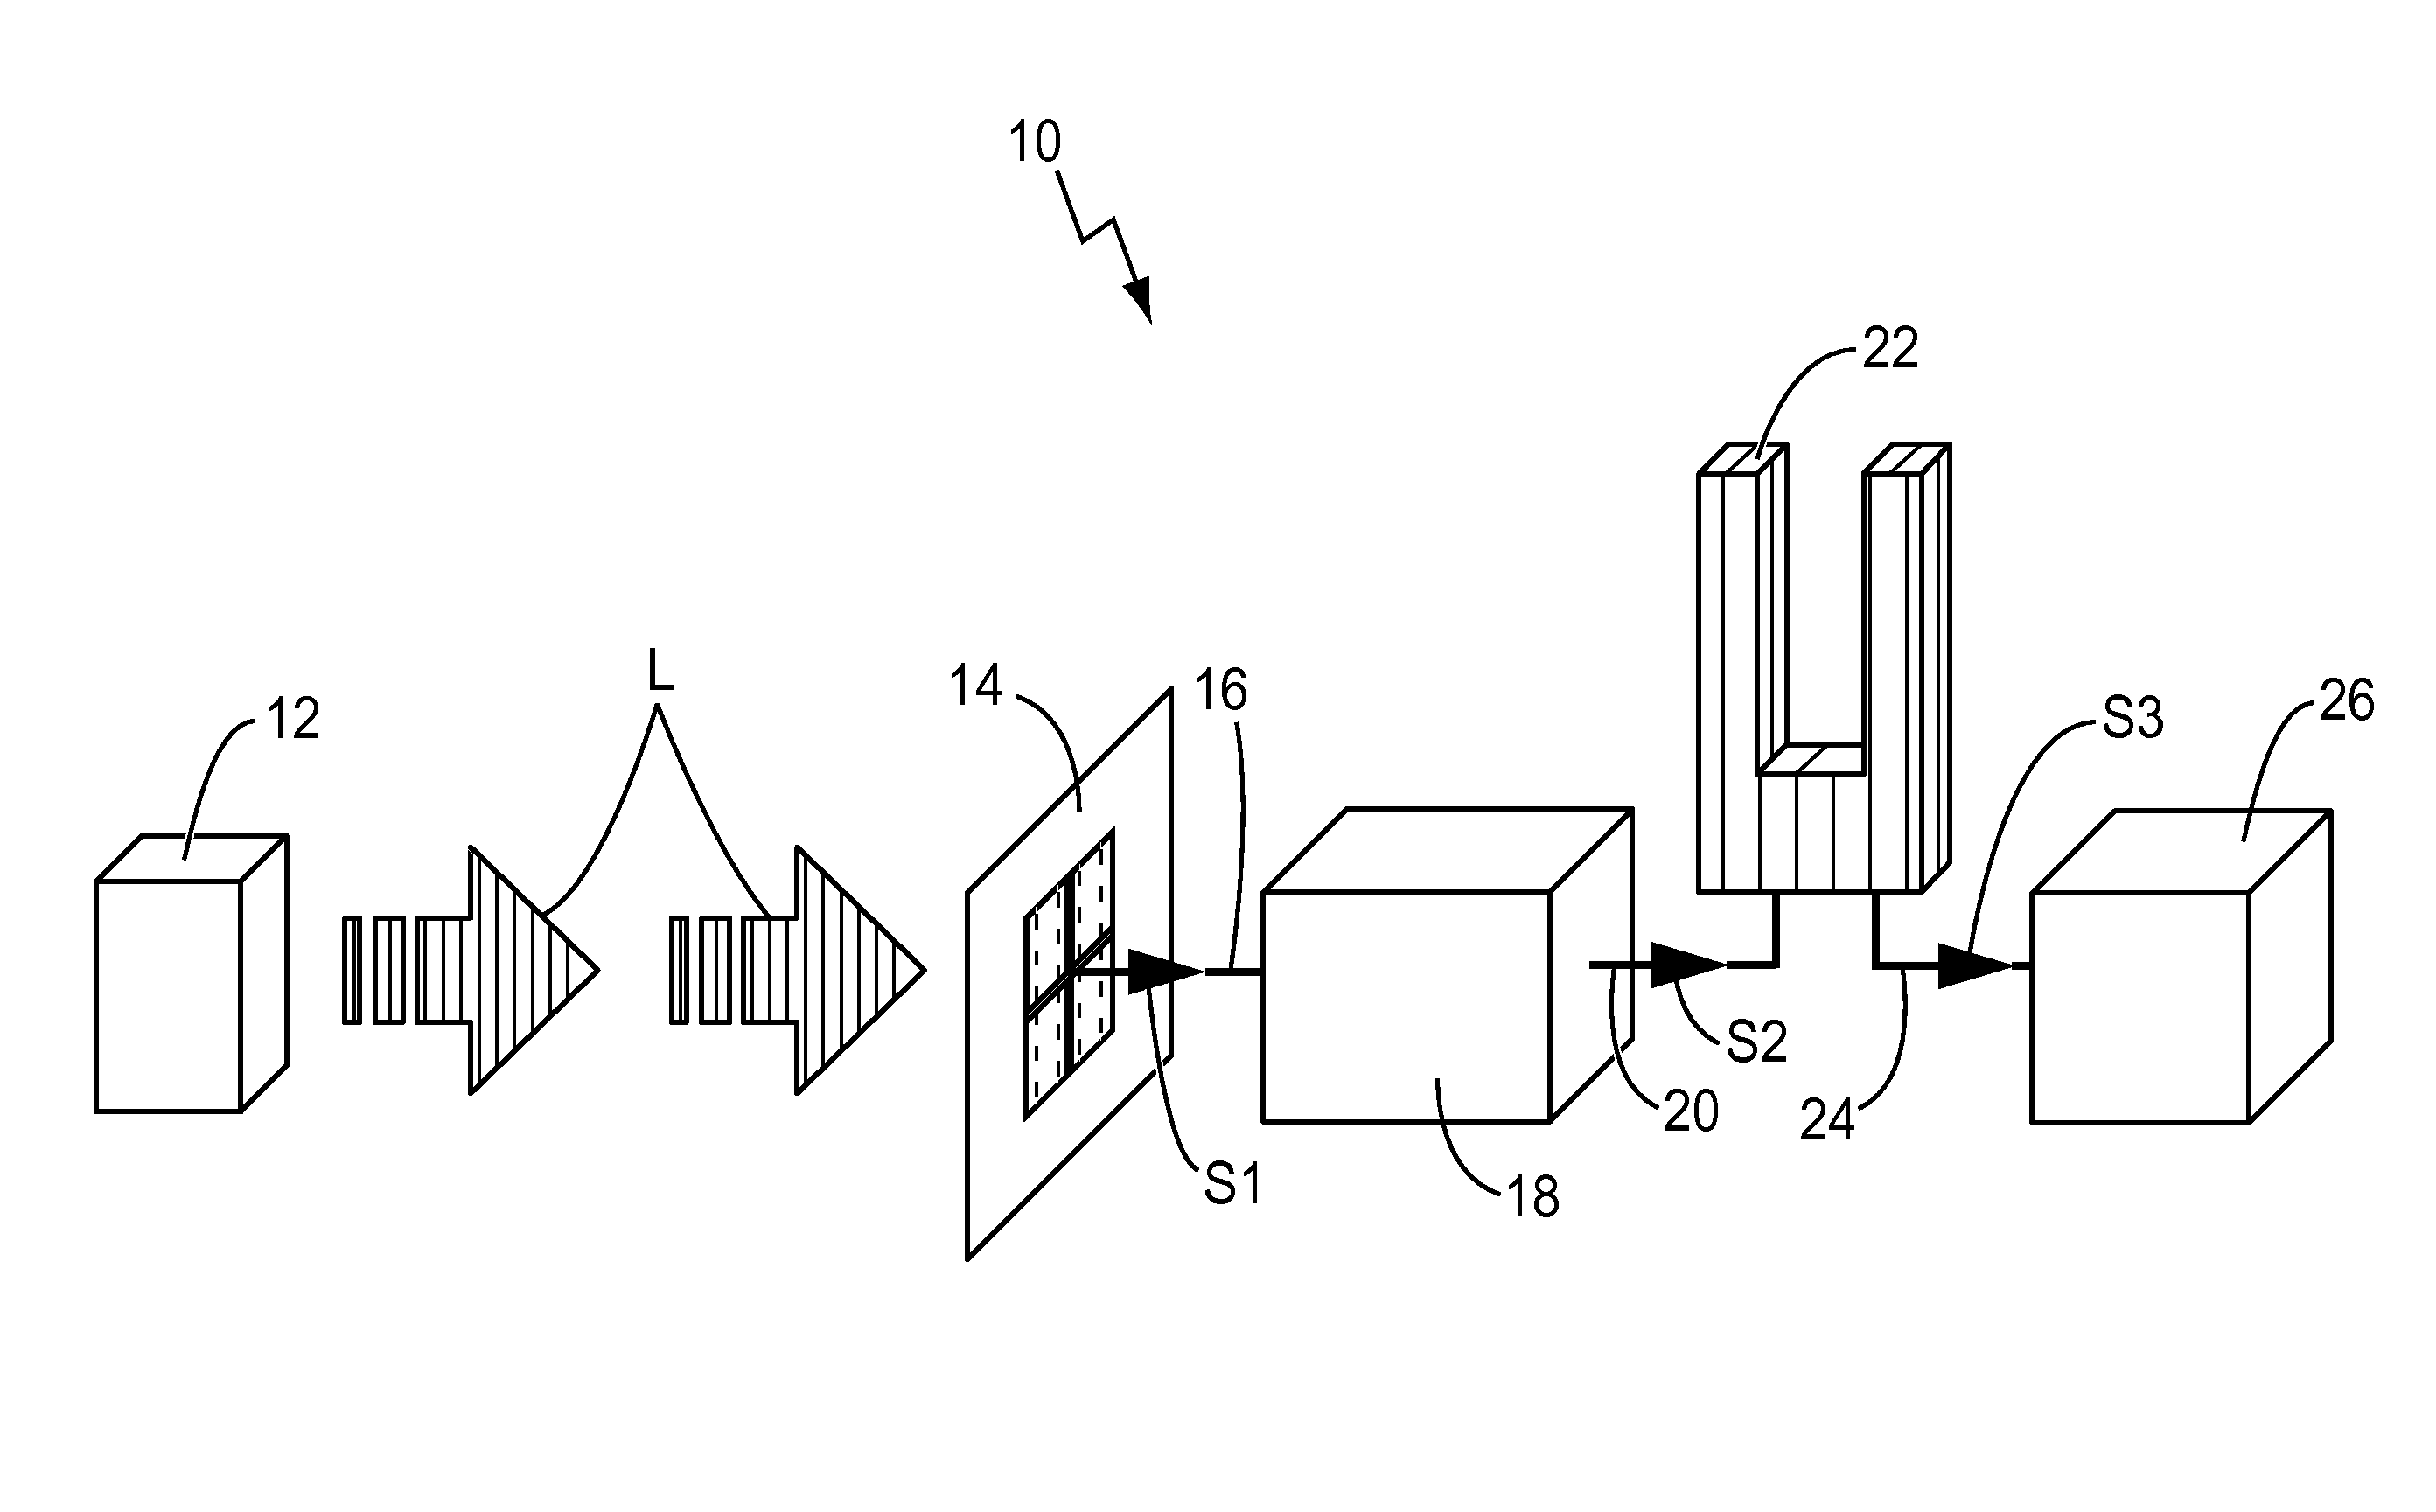 Acoustic enhancement for photo detecting devices